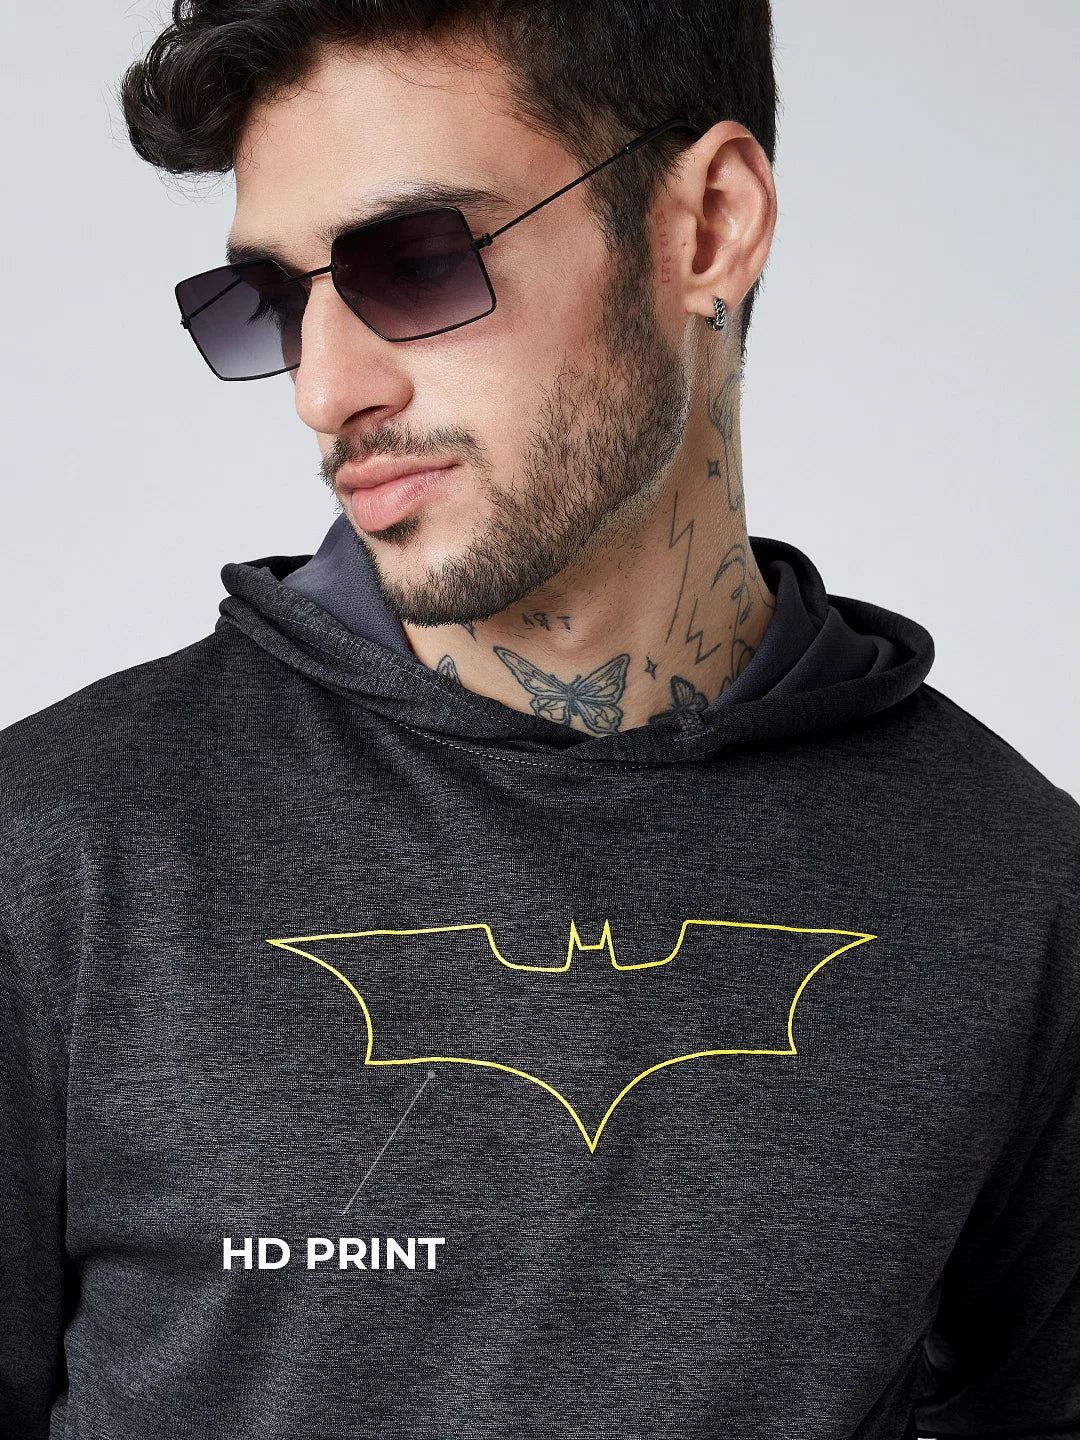 DC Batman All Weather Hoodies (Limited Edition) UK version